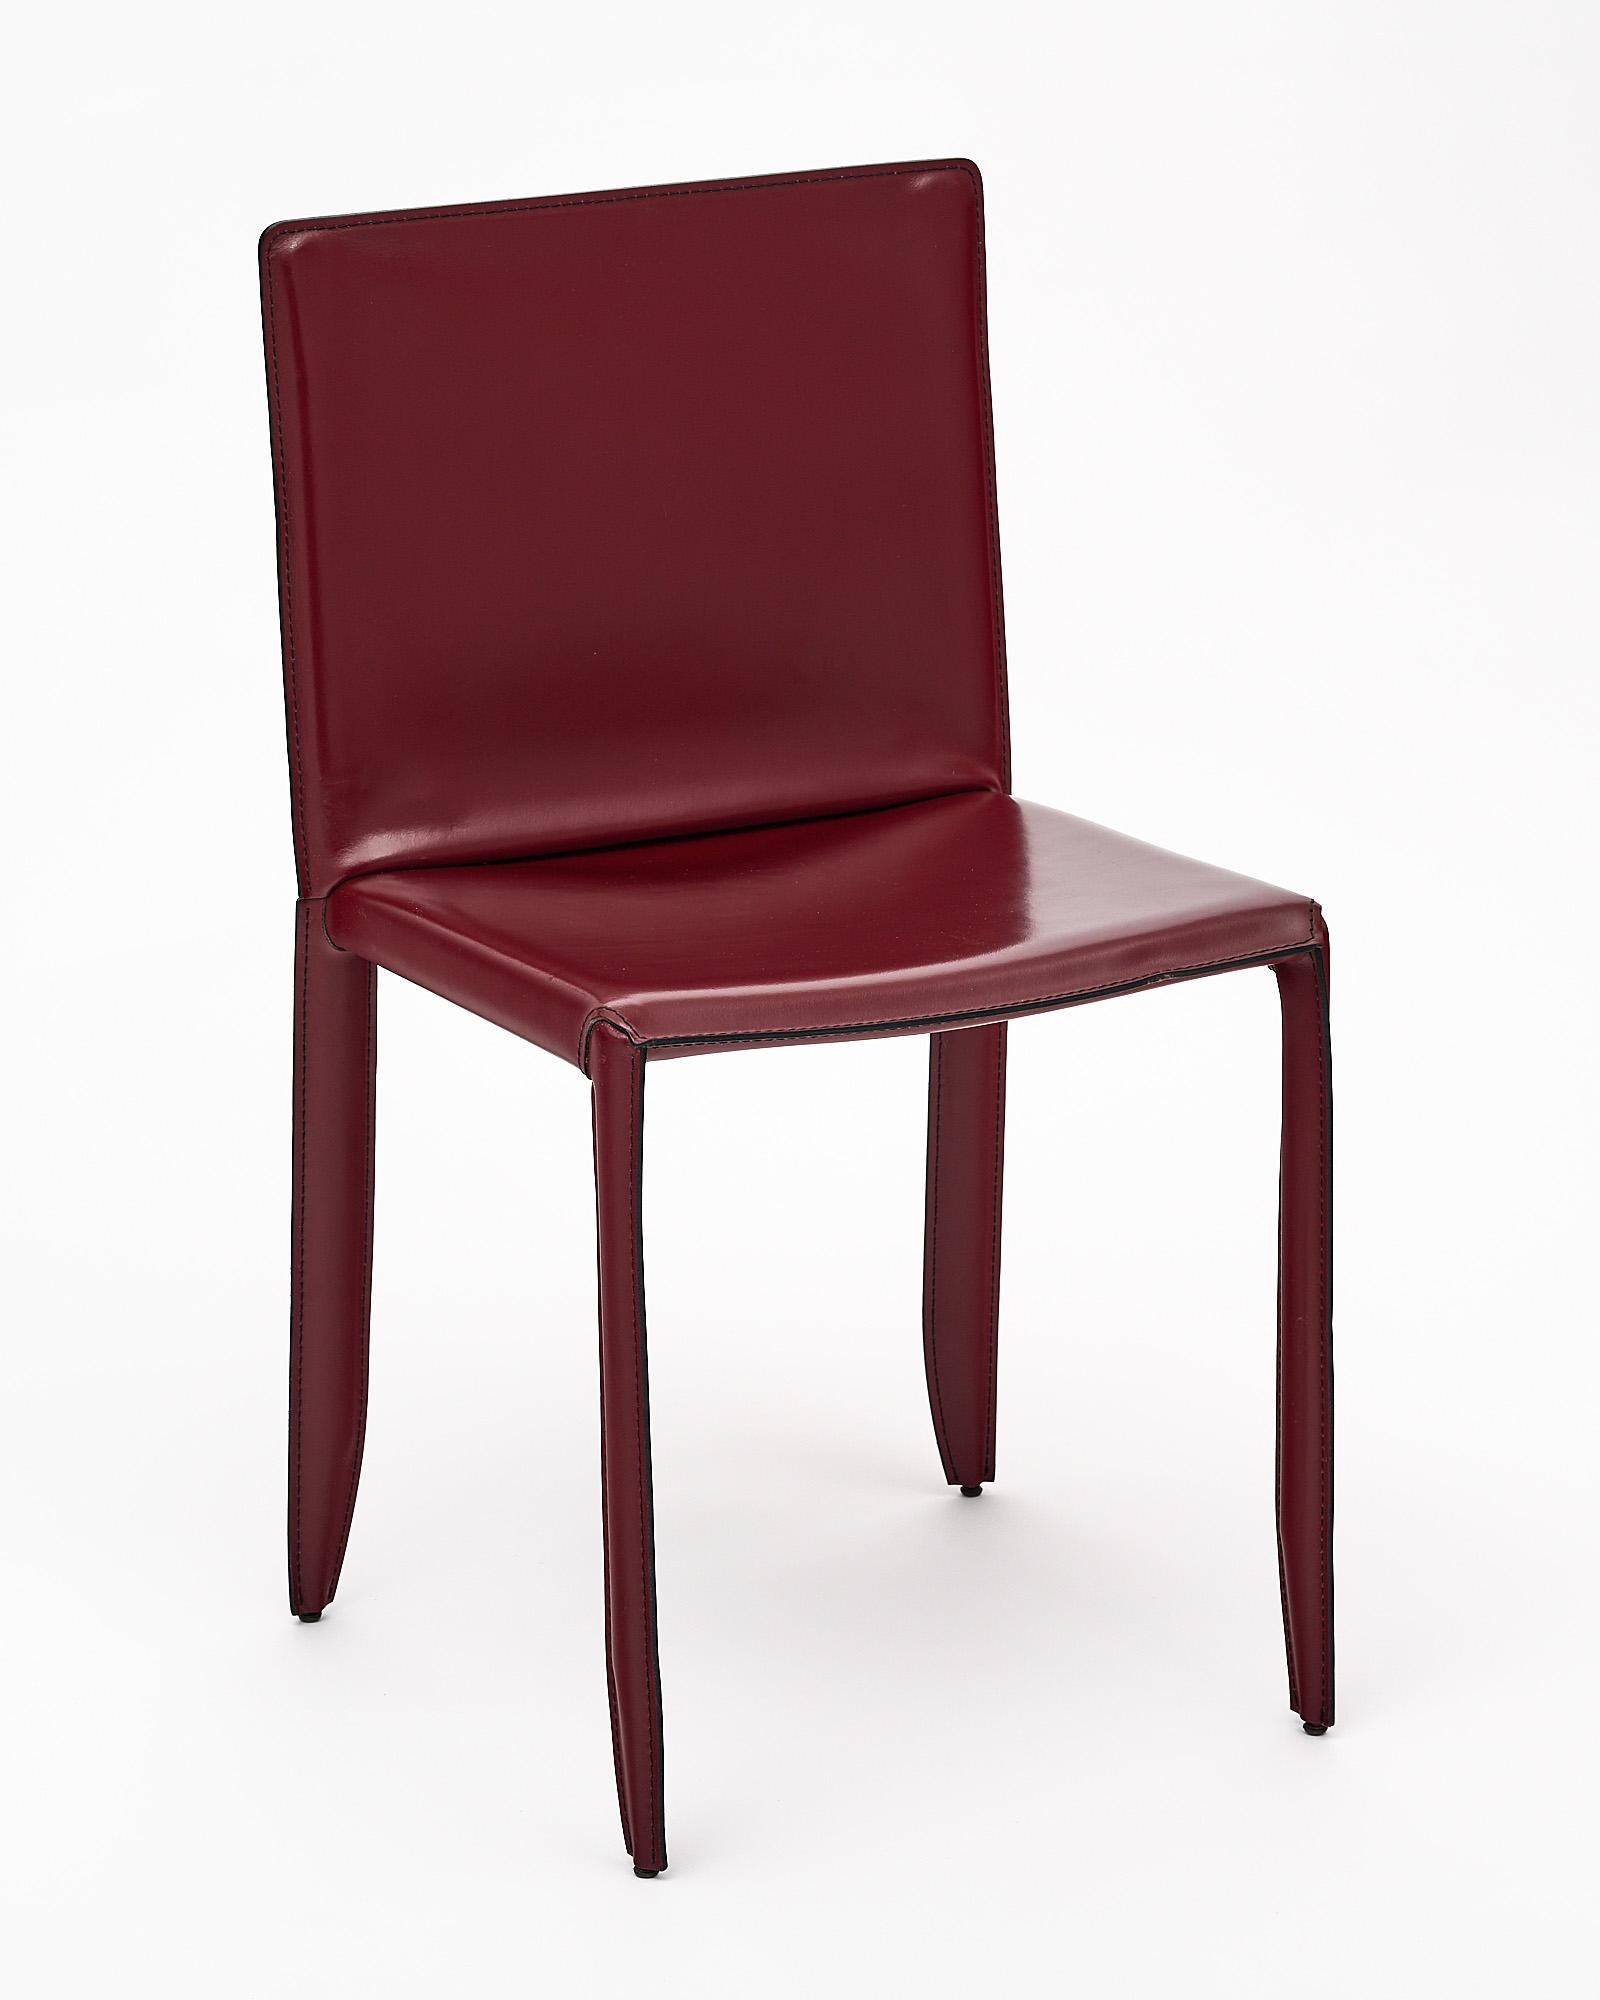 Set of four chairs by Cattelan Italia, stitched red leather.